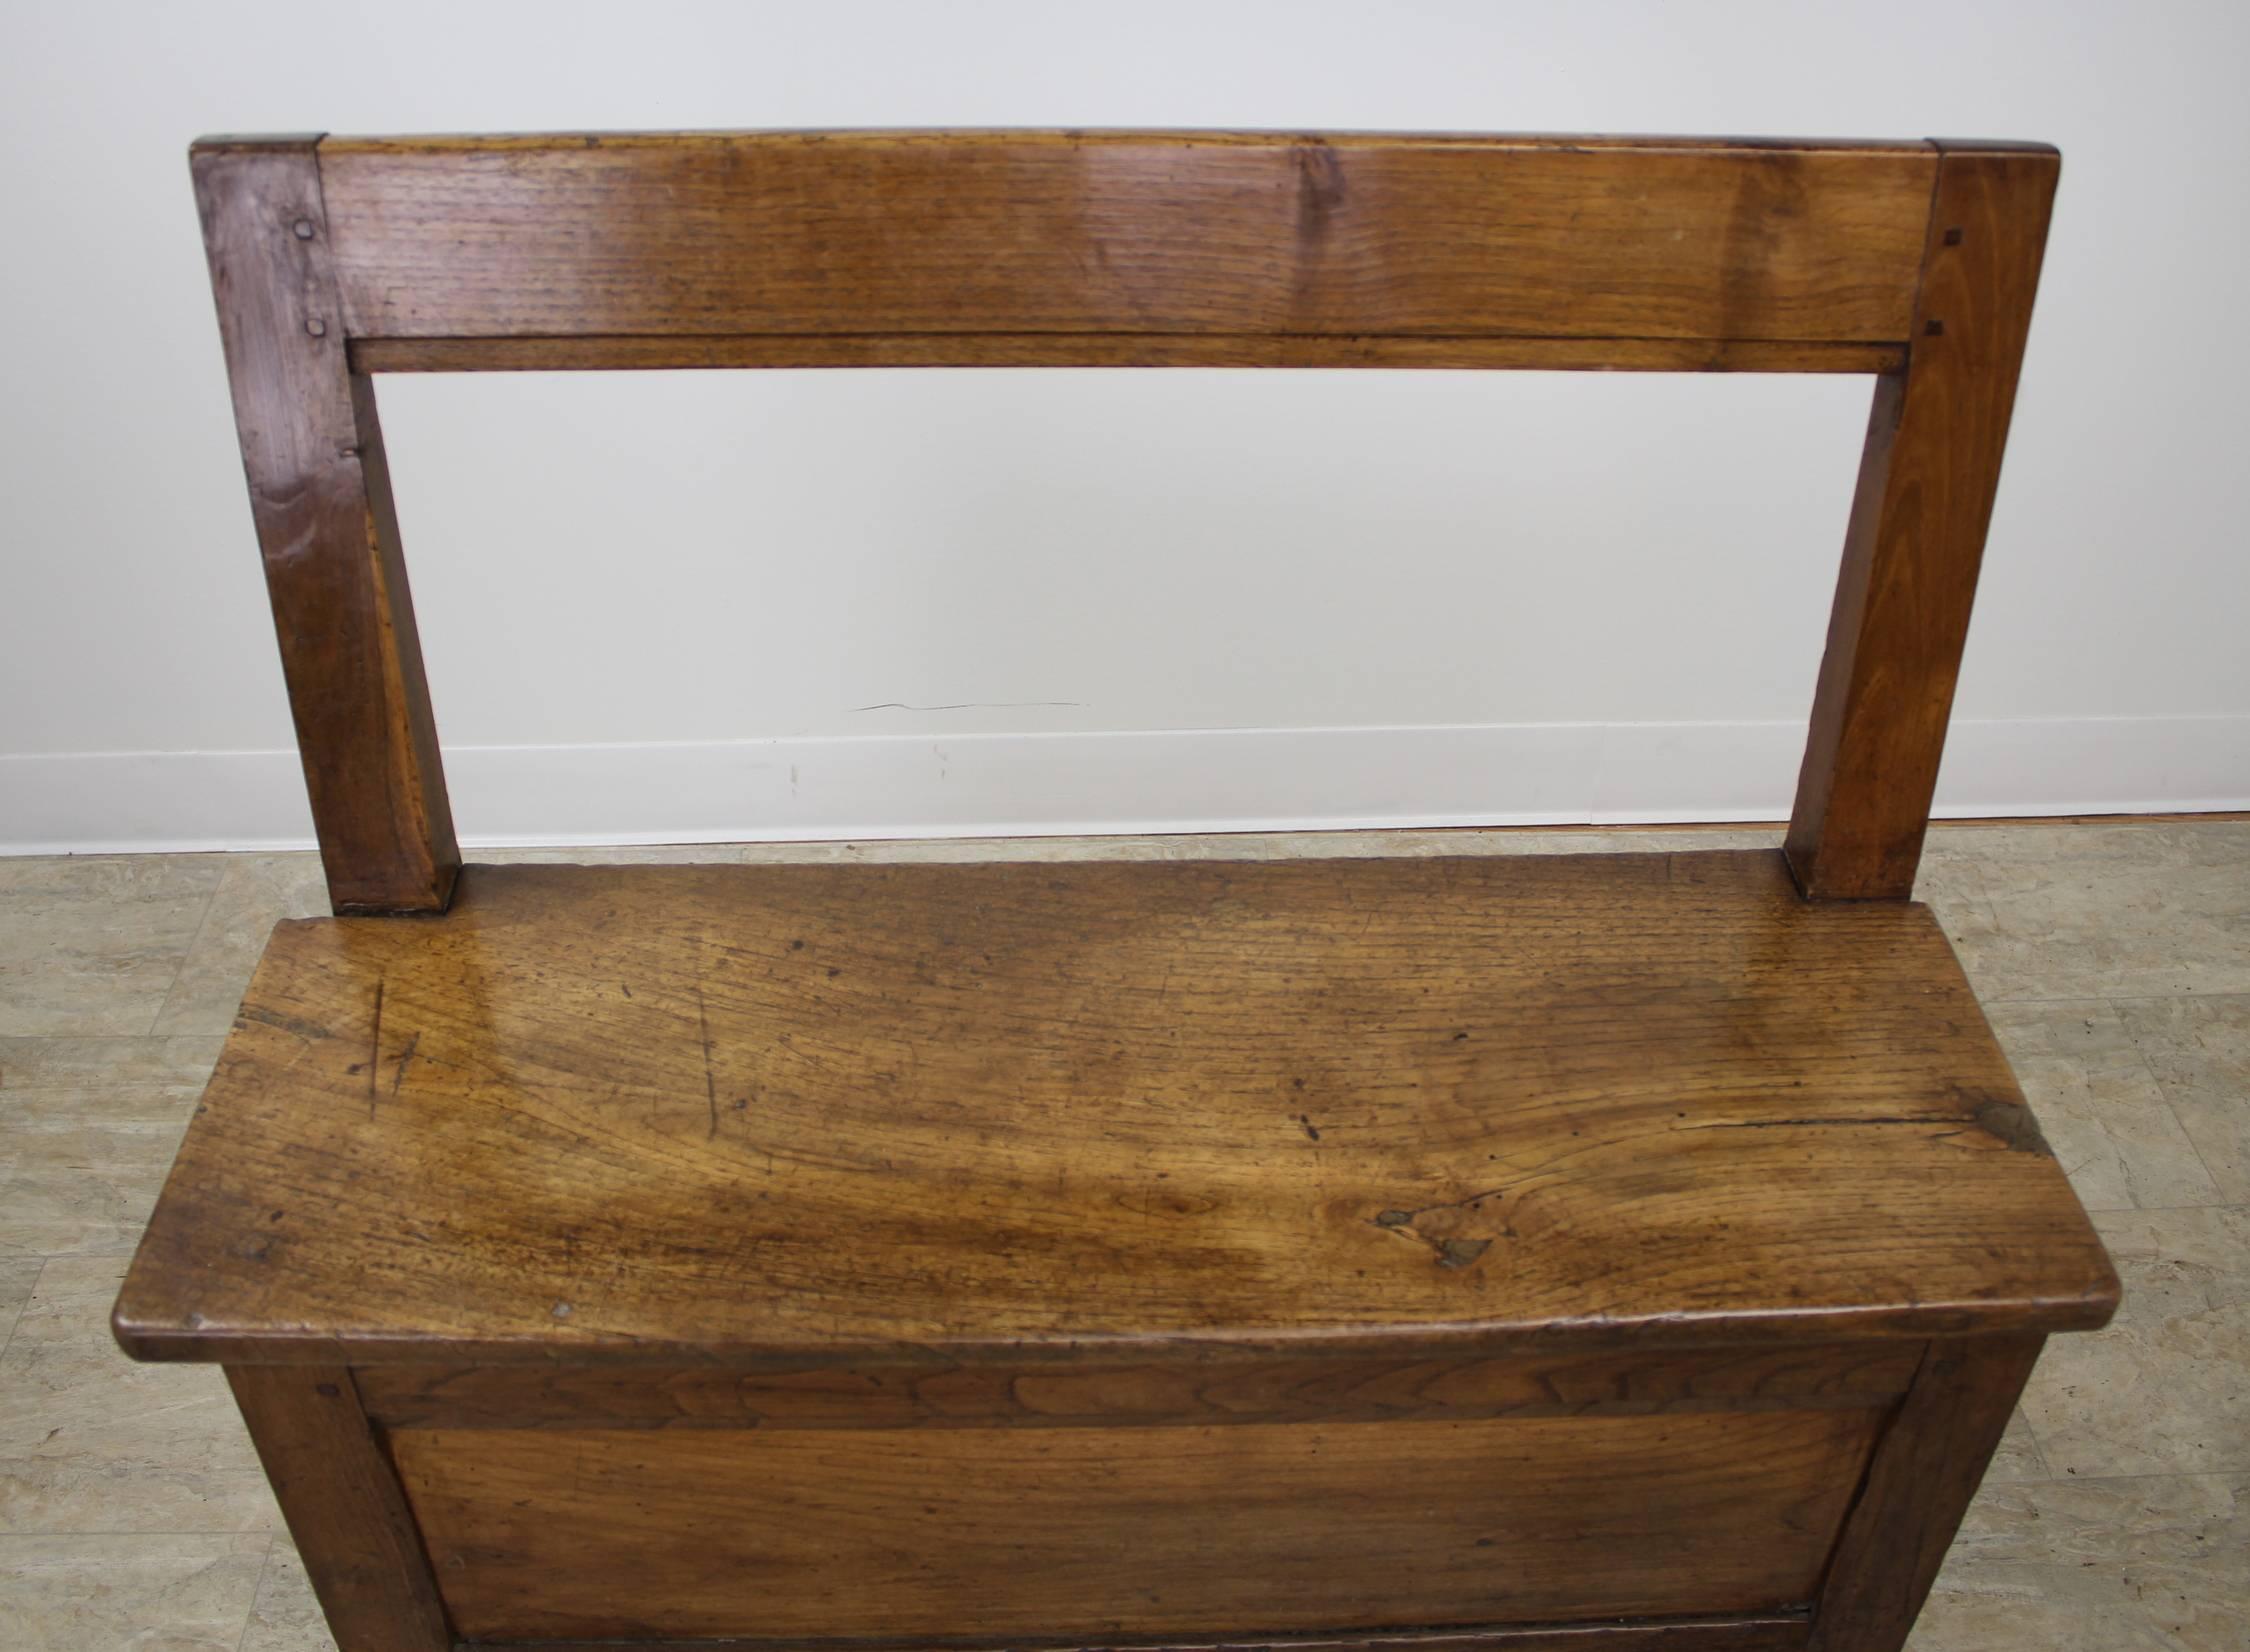 A sweet little bench for the hallway, bedroom or fire side. Mellow chestnut with lovely patina and charming inset panels. The single drawer is quite deep and can provide useful storage.